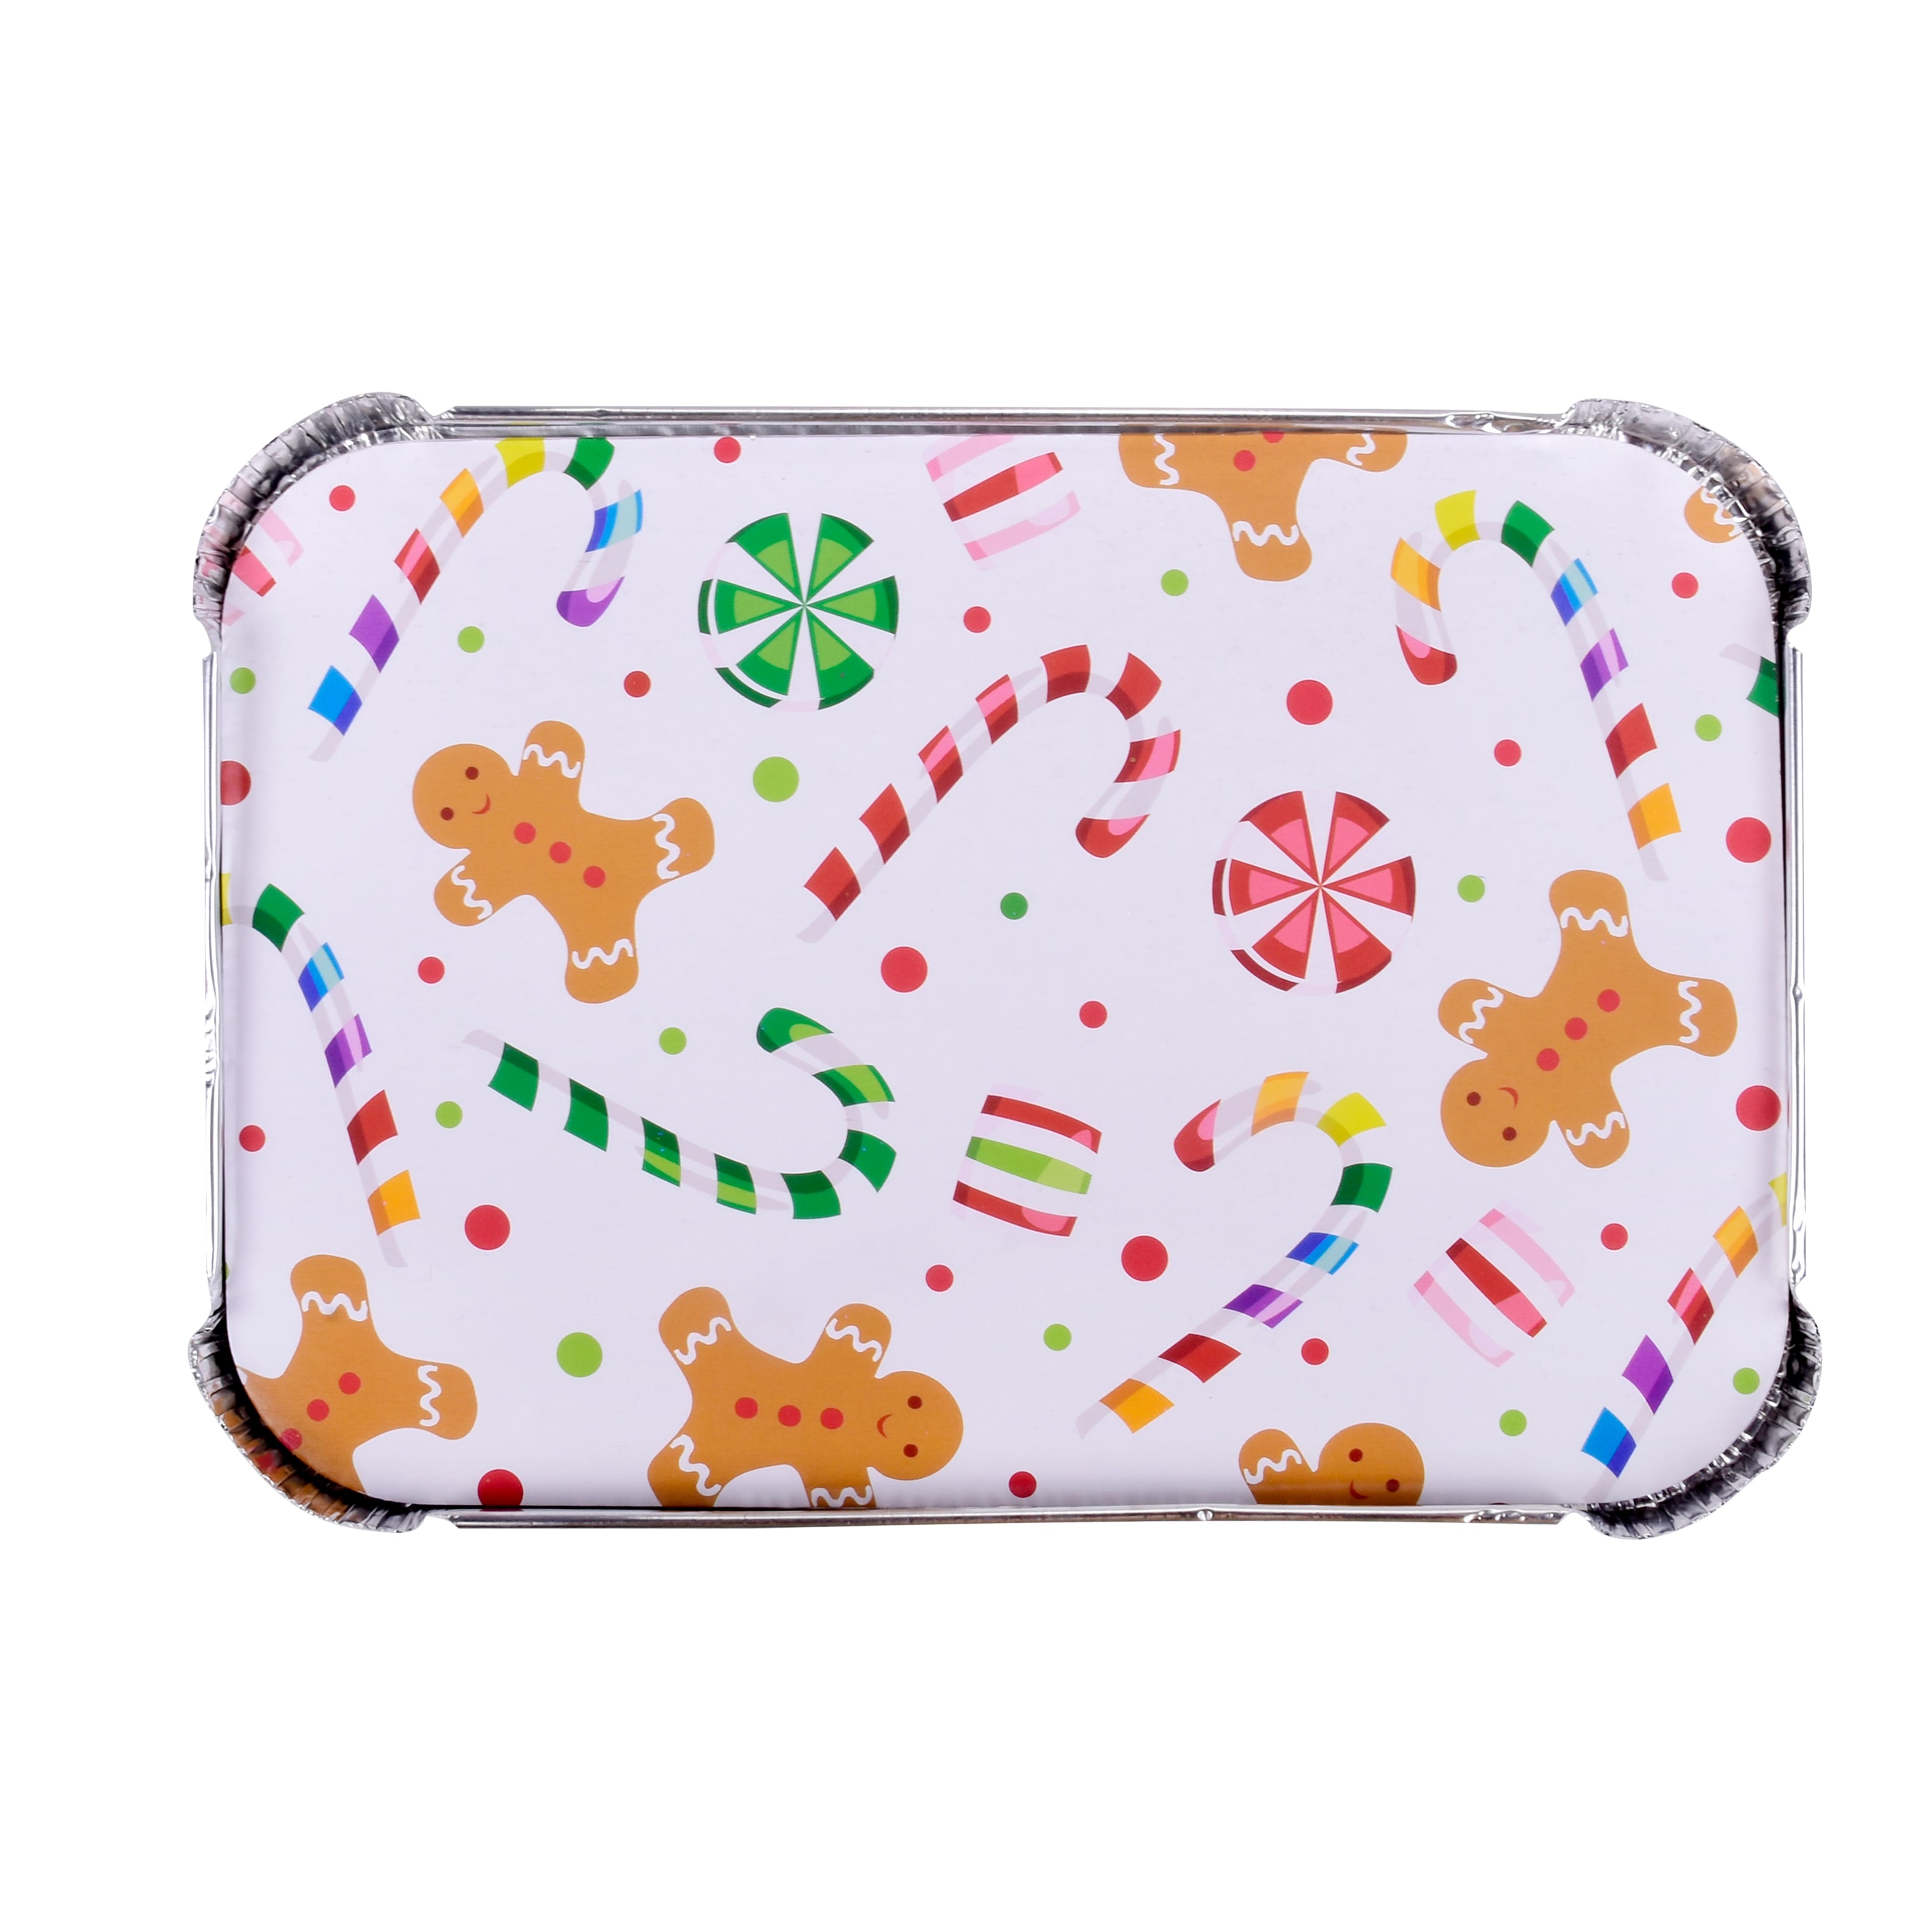 6 Christmas Holiday Gingerbread Candy Disposable Aluminum Baking Pans by  Celebrate It™, 6ct.